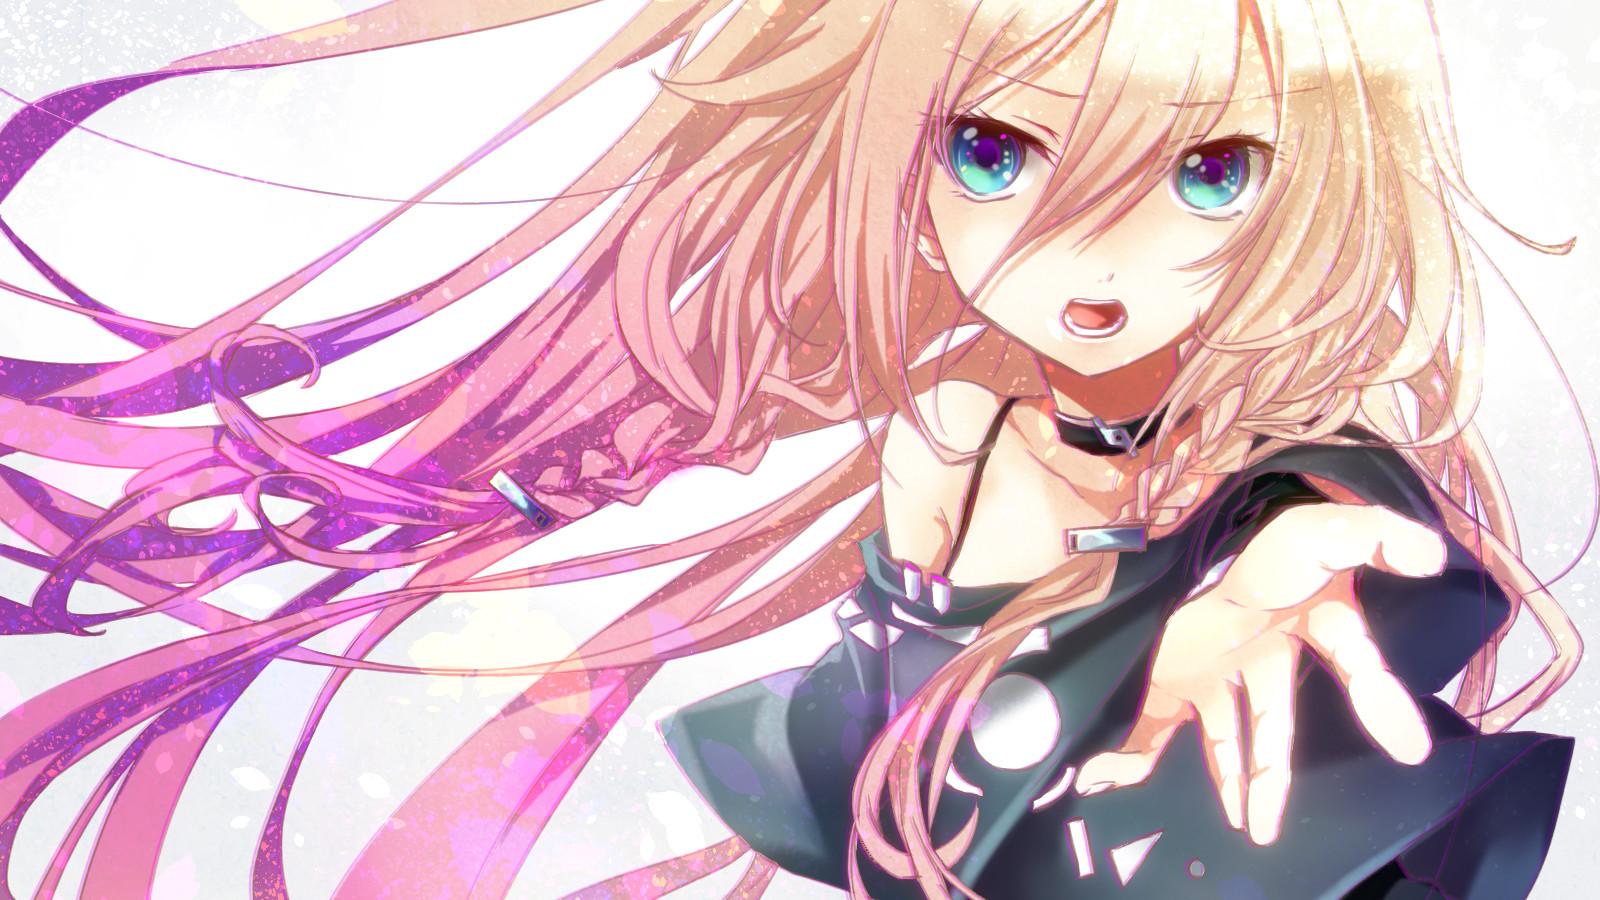 Lexica - Cute anime boy with blonde, messy, wavy hair